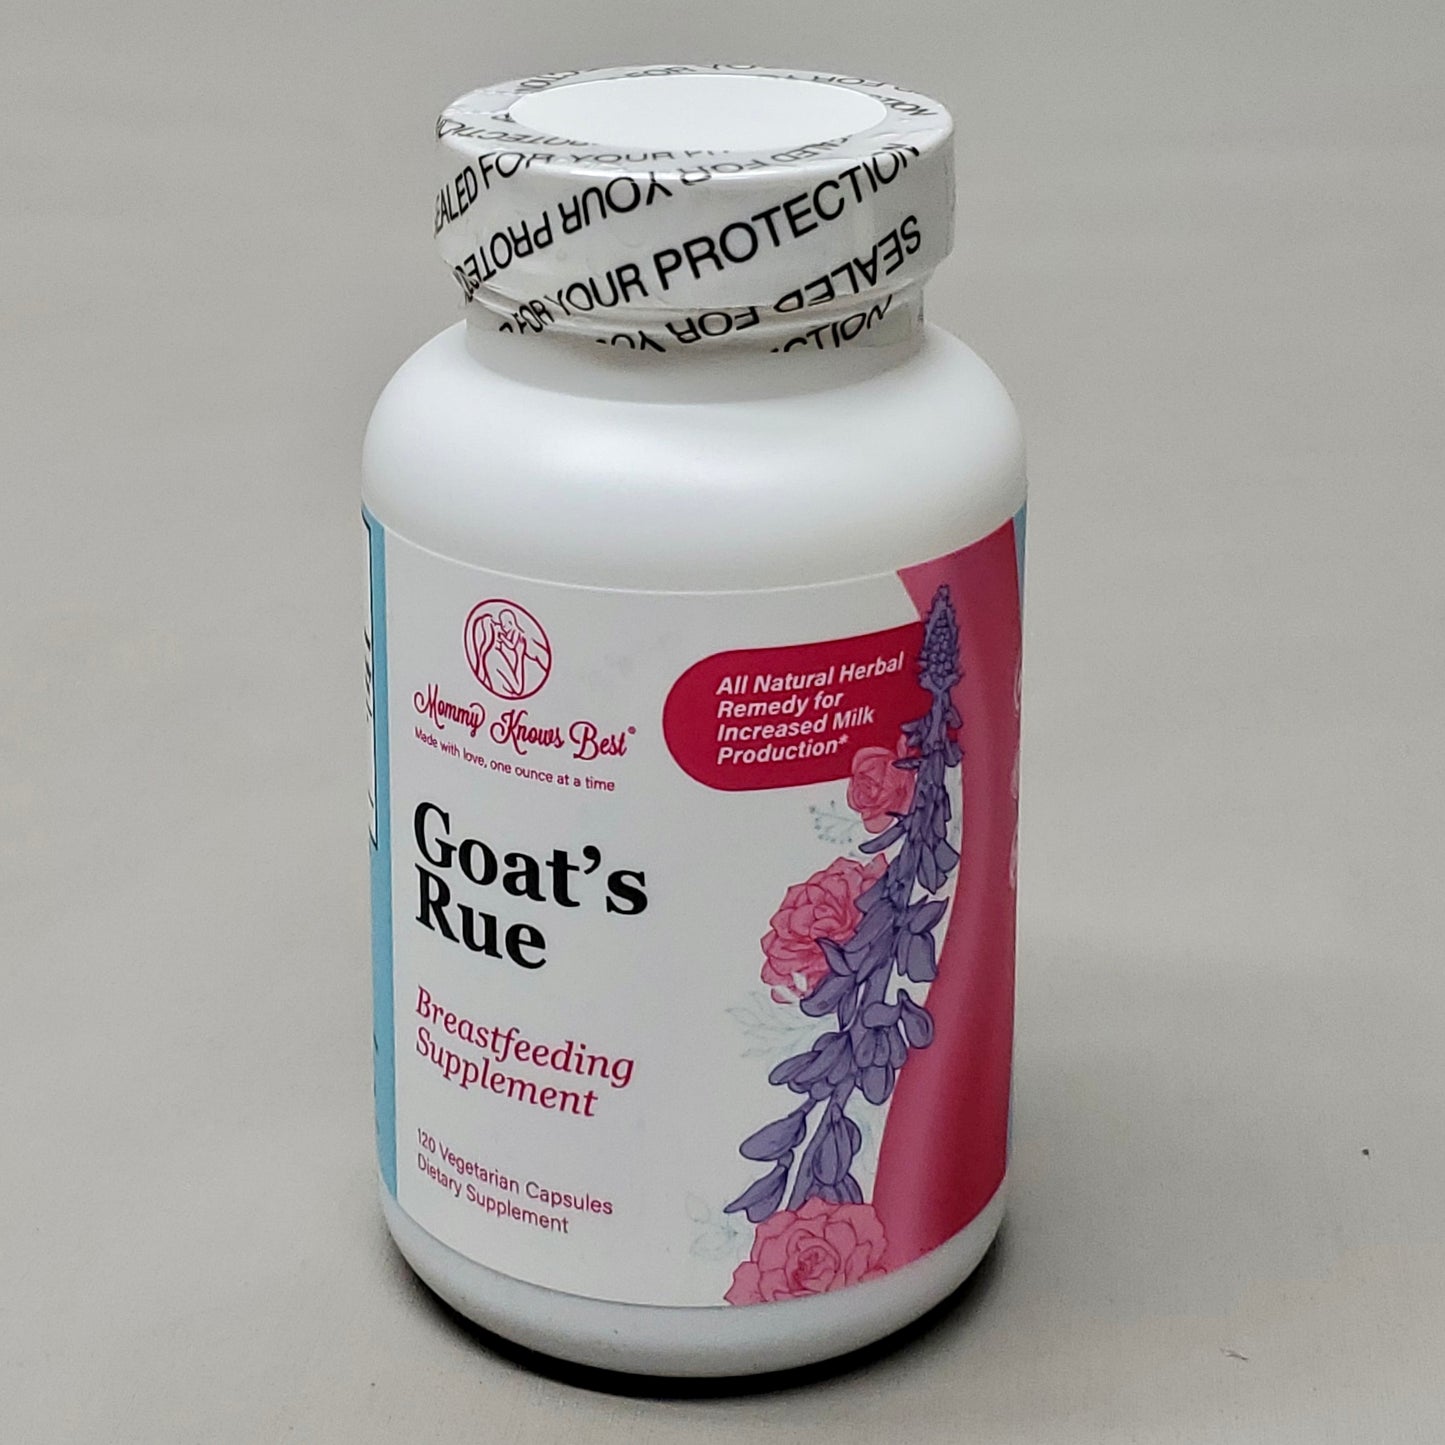 MOMMY KNOWS BEST 6-PACK! Goat's Rue Breastfeeding Supplement 120 Capsules 720 Total Exp 10/23